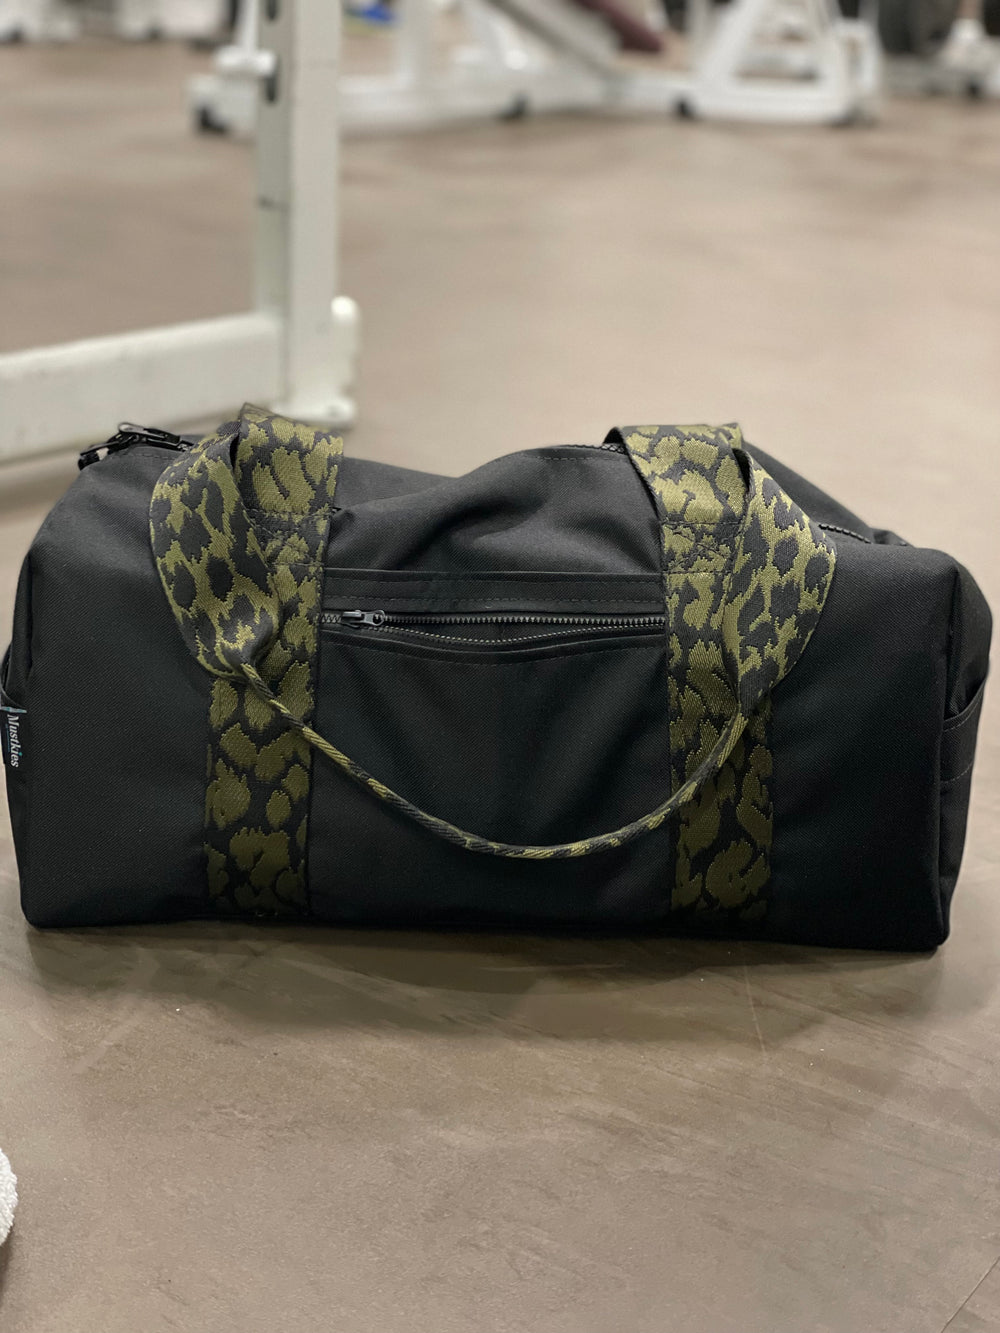 Mustkies Paris Duffel Bag, handmade in a black waterproof canvas and finished in a green camouflage strap. Green lining with 4 exterior and interior pockets. 